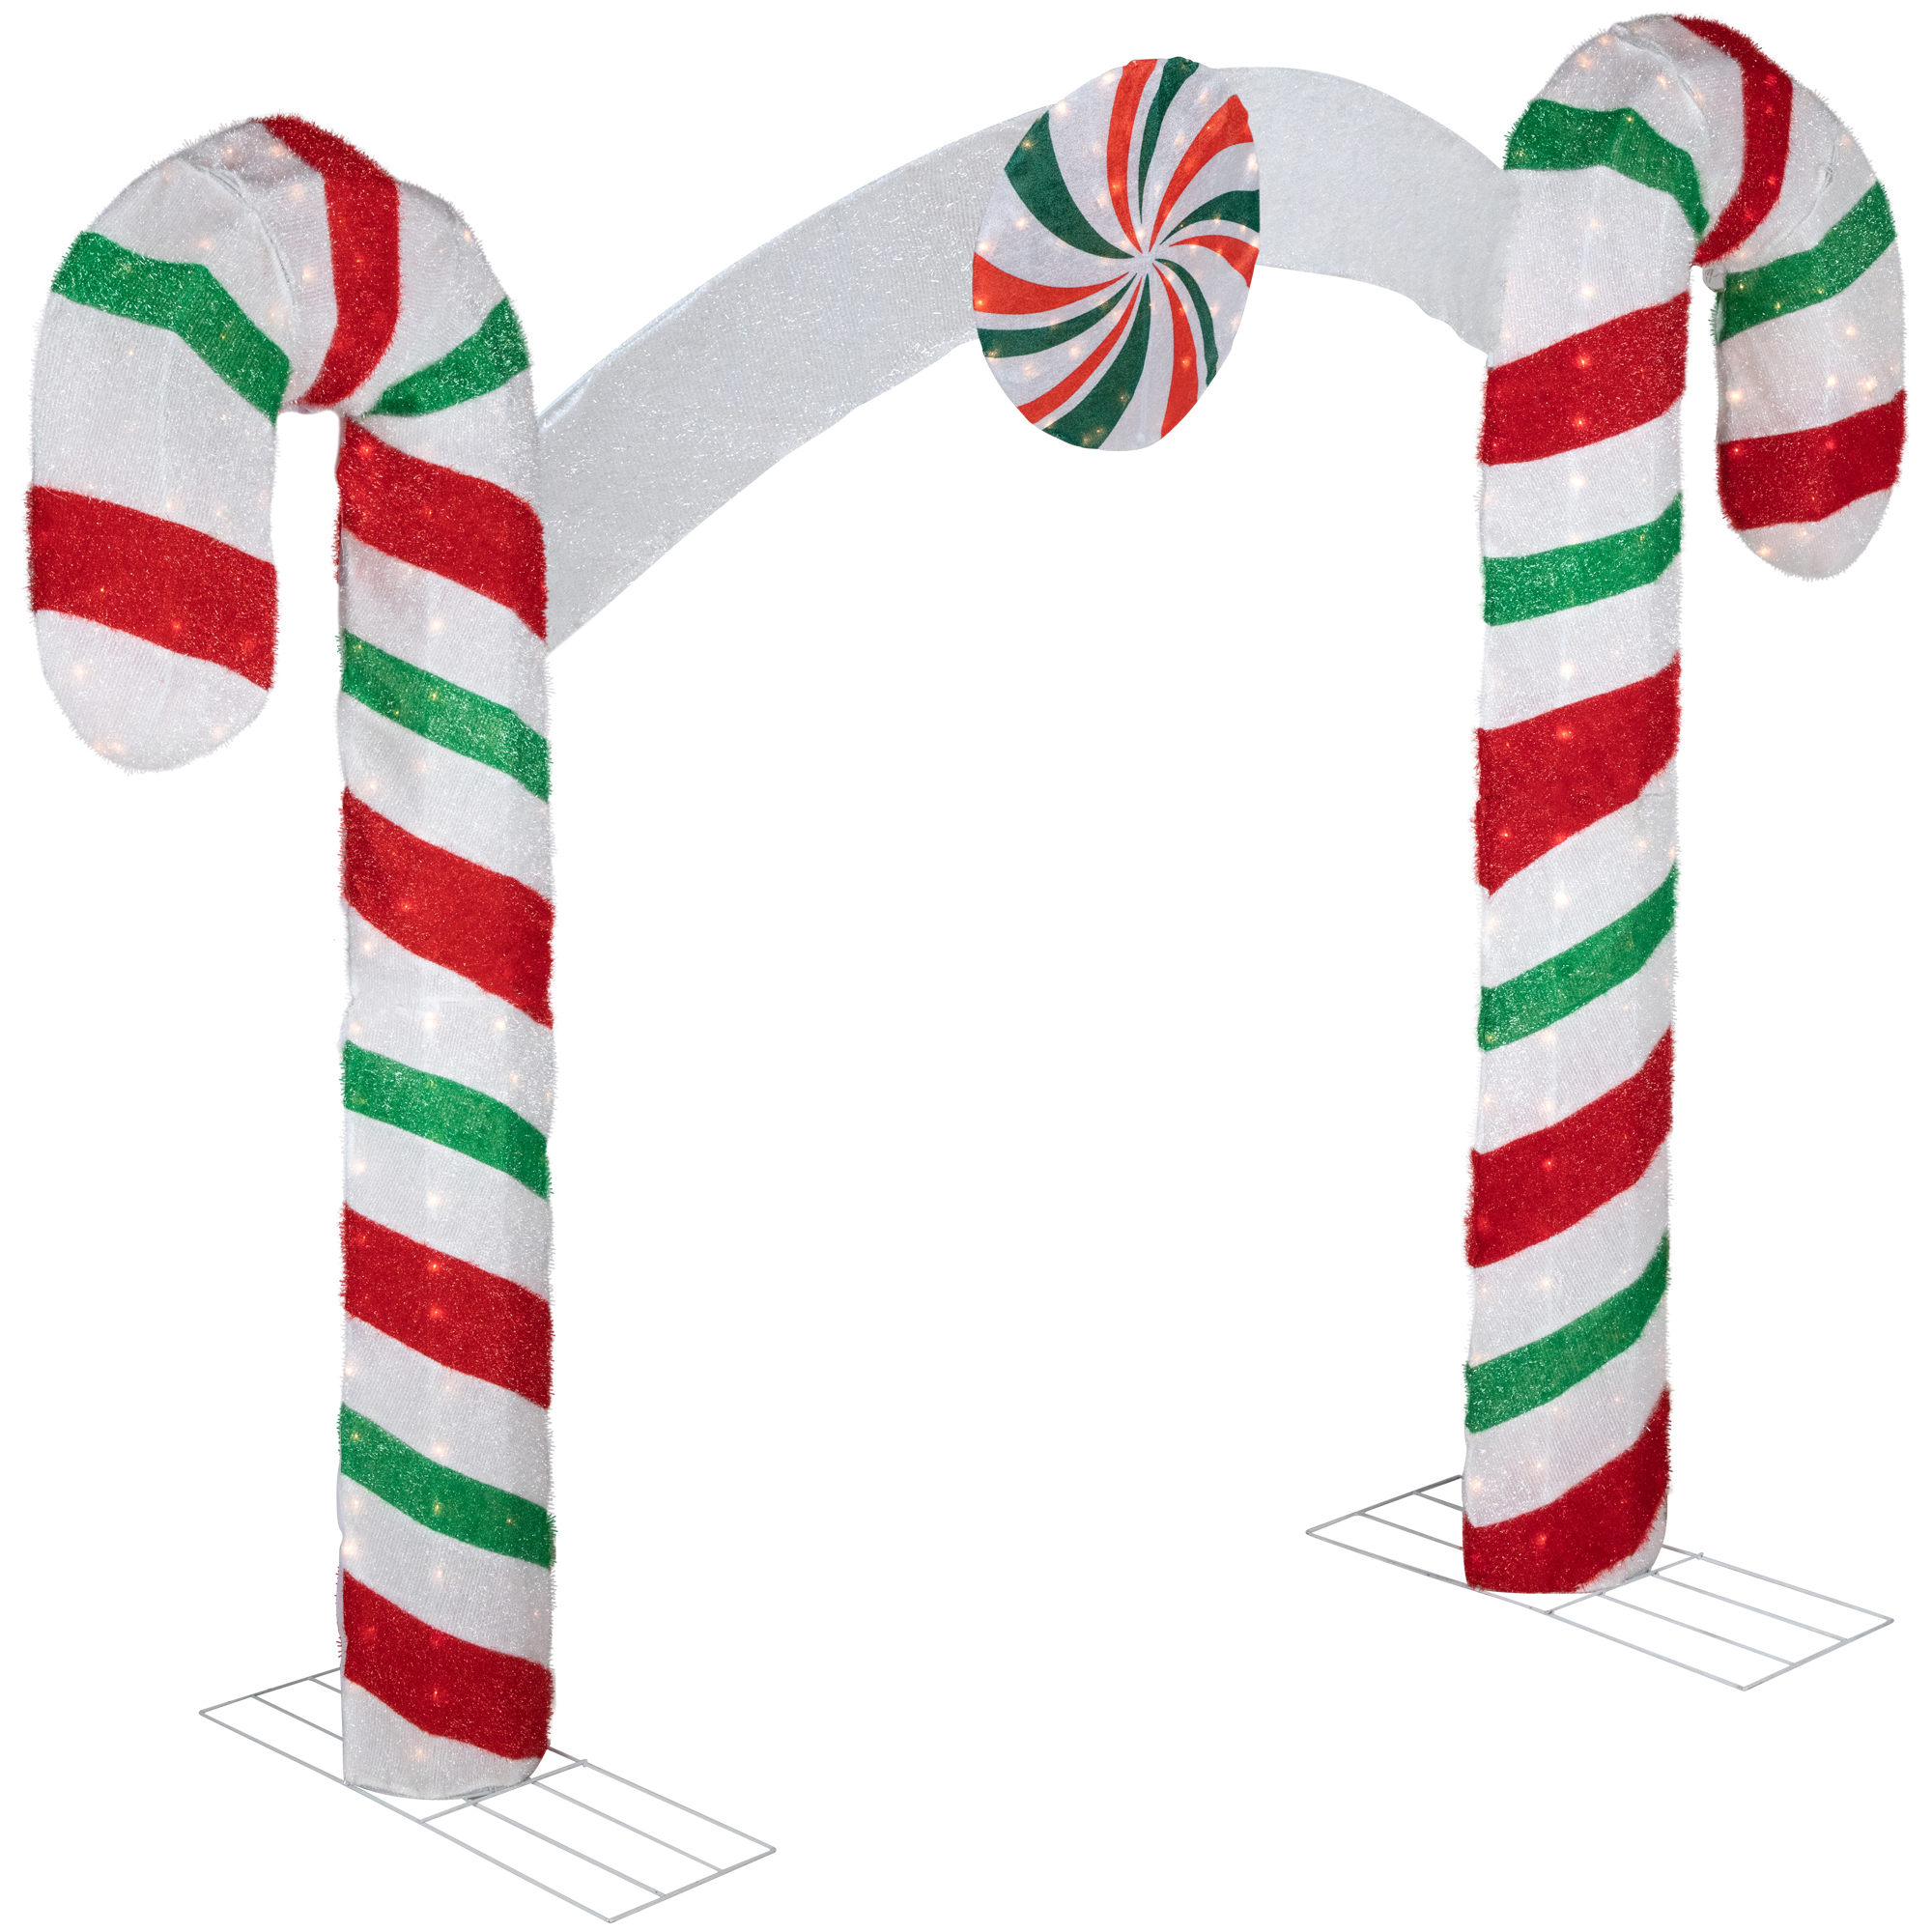 Northlight 7' Lighted Double Candy Cane Archway Outdoor Christmas Decoration